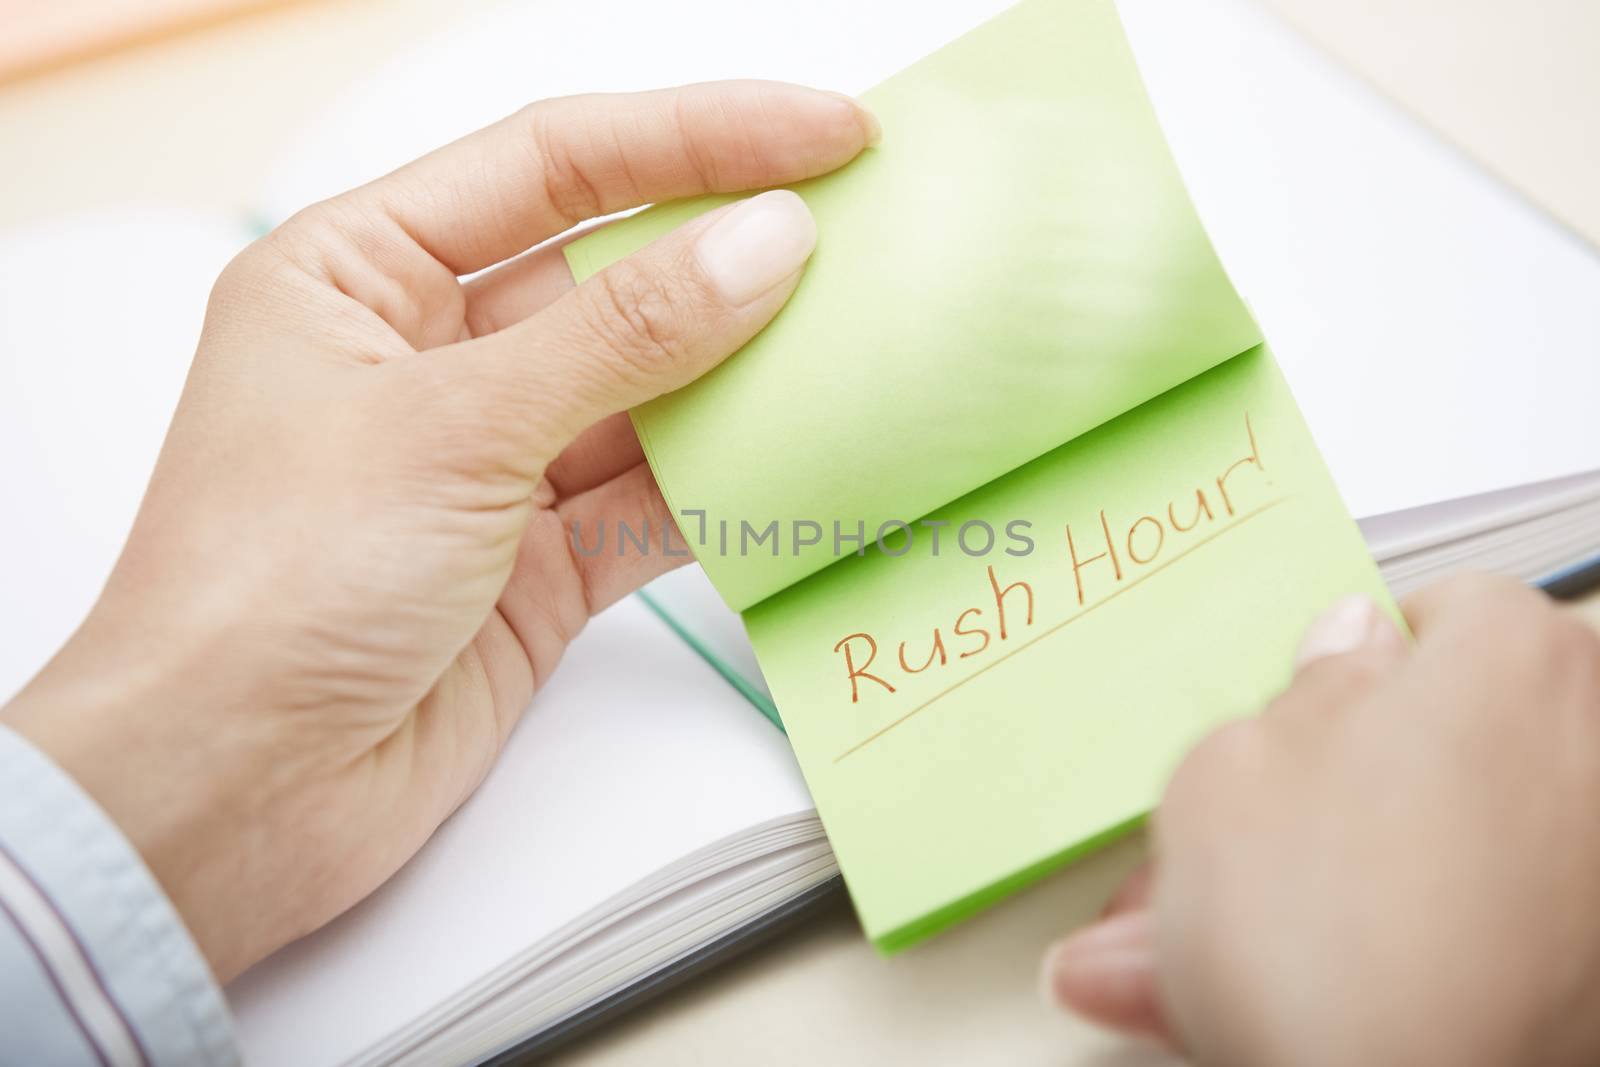 Hands holding pink sticky note with Rush hour text